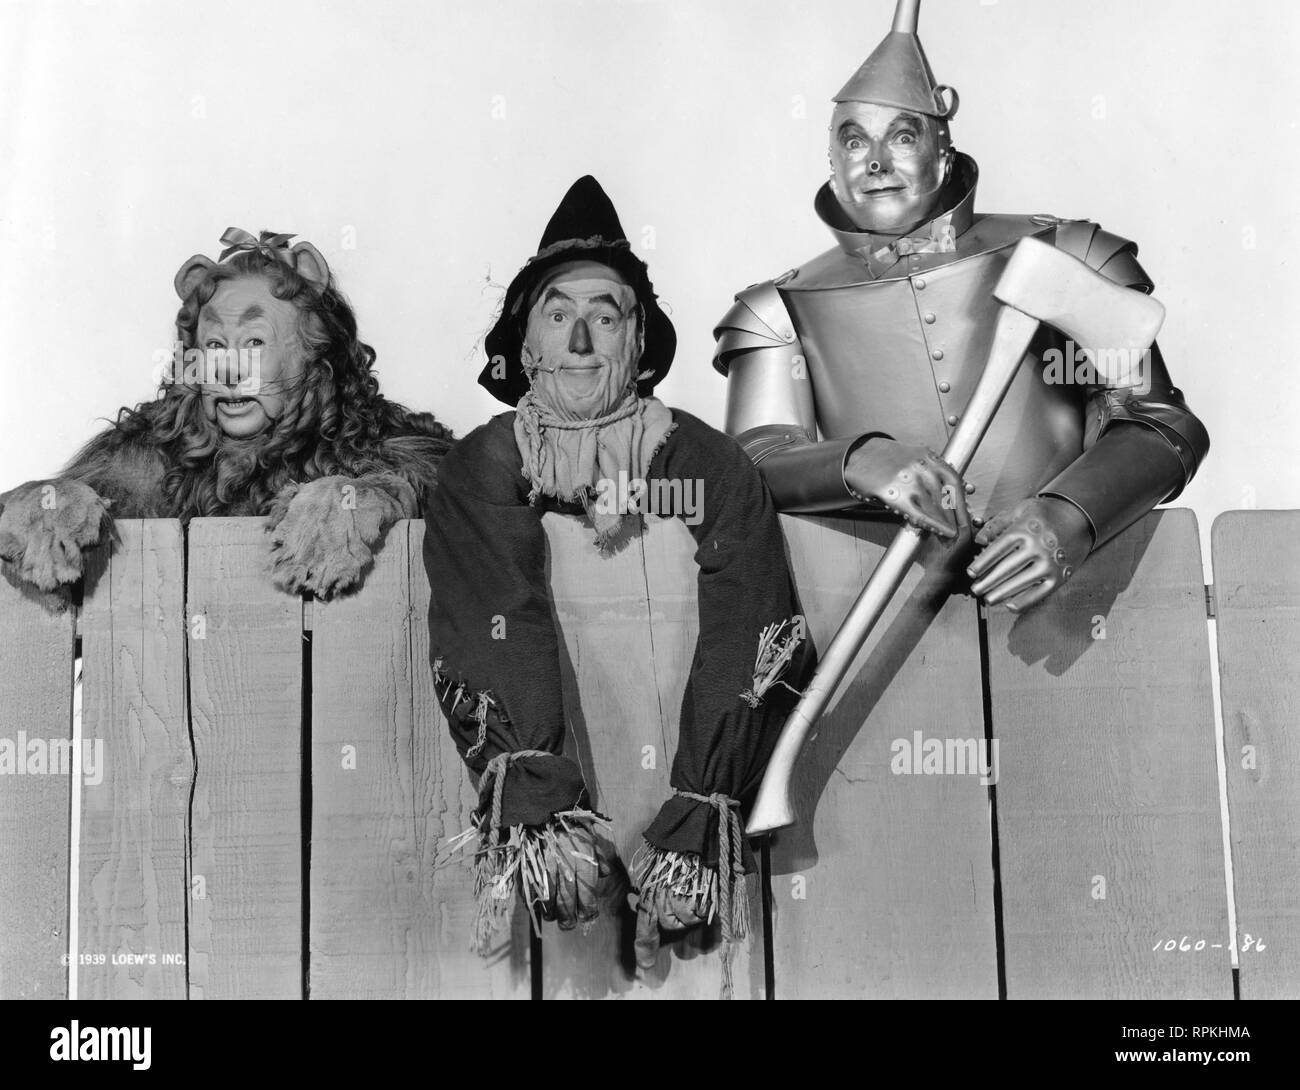 The Wizard of Oz 1939 Bert Lahr as Cowardly Lion Ray Bolger as Scarecrow  Jack Haley as Tin Man director Victor Fleming  Frank L Baum MGM Stock Photo